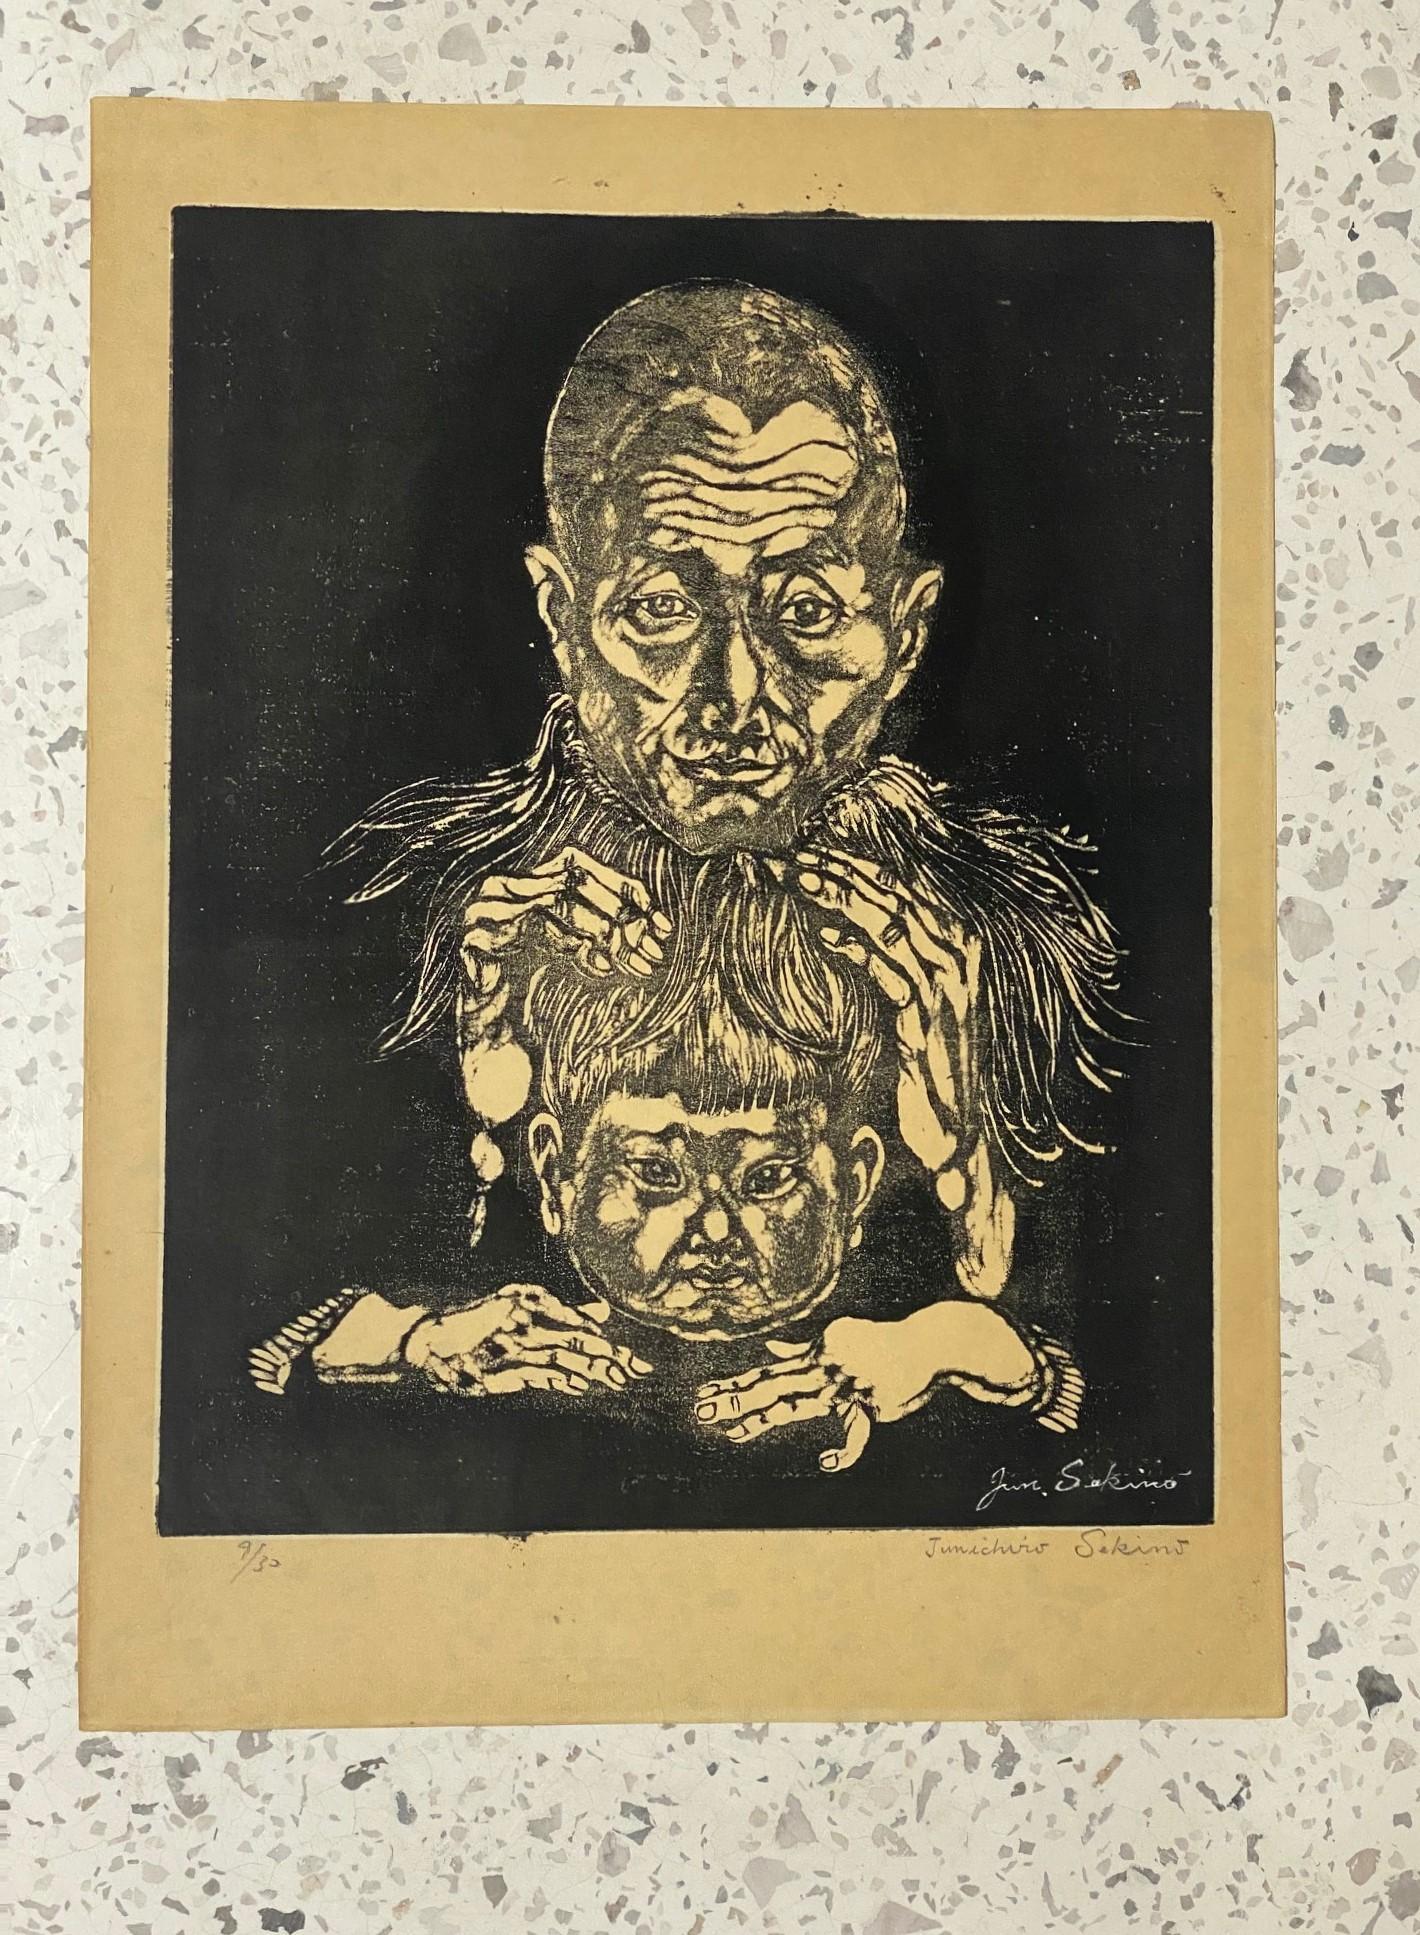 A truly wonderful and exceedingly rare early limited edition woodblock print by famed Japanese artist/printmaker Junichiro Sekino.

This print, titled 